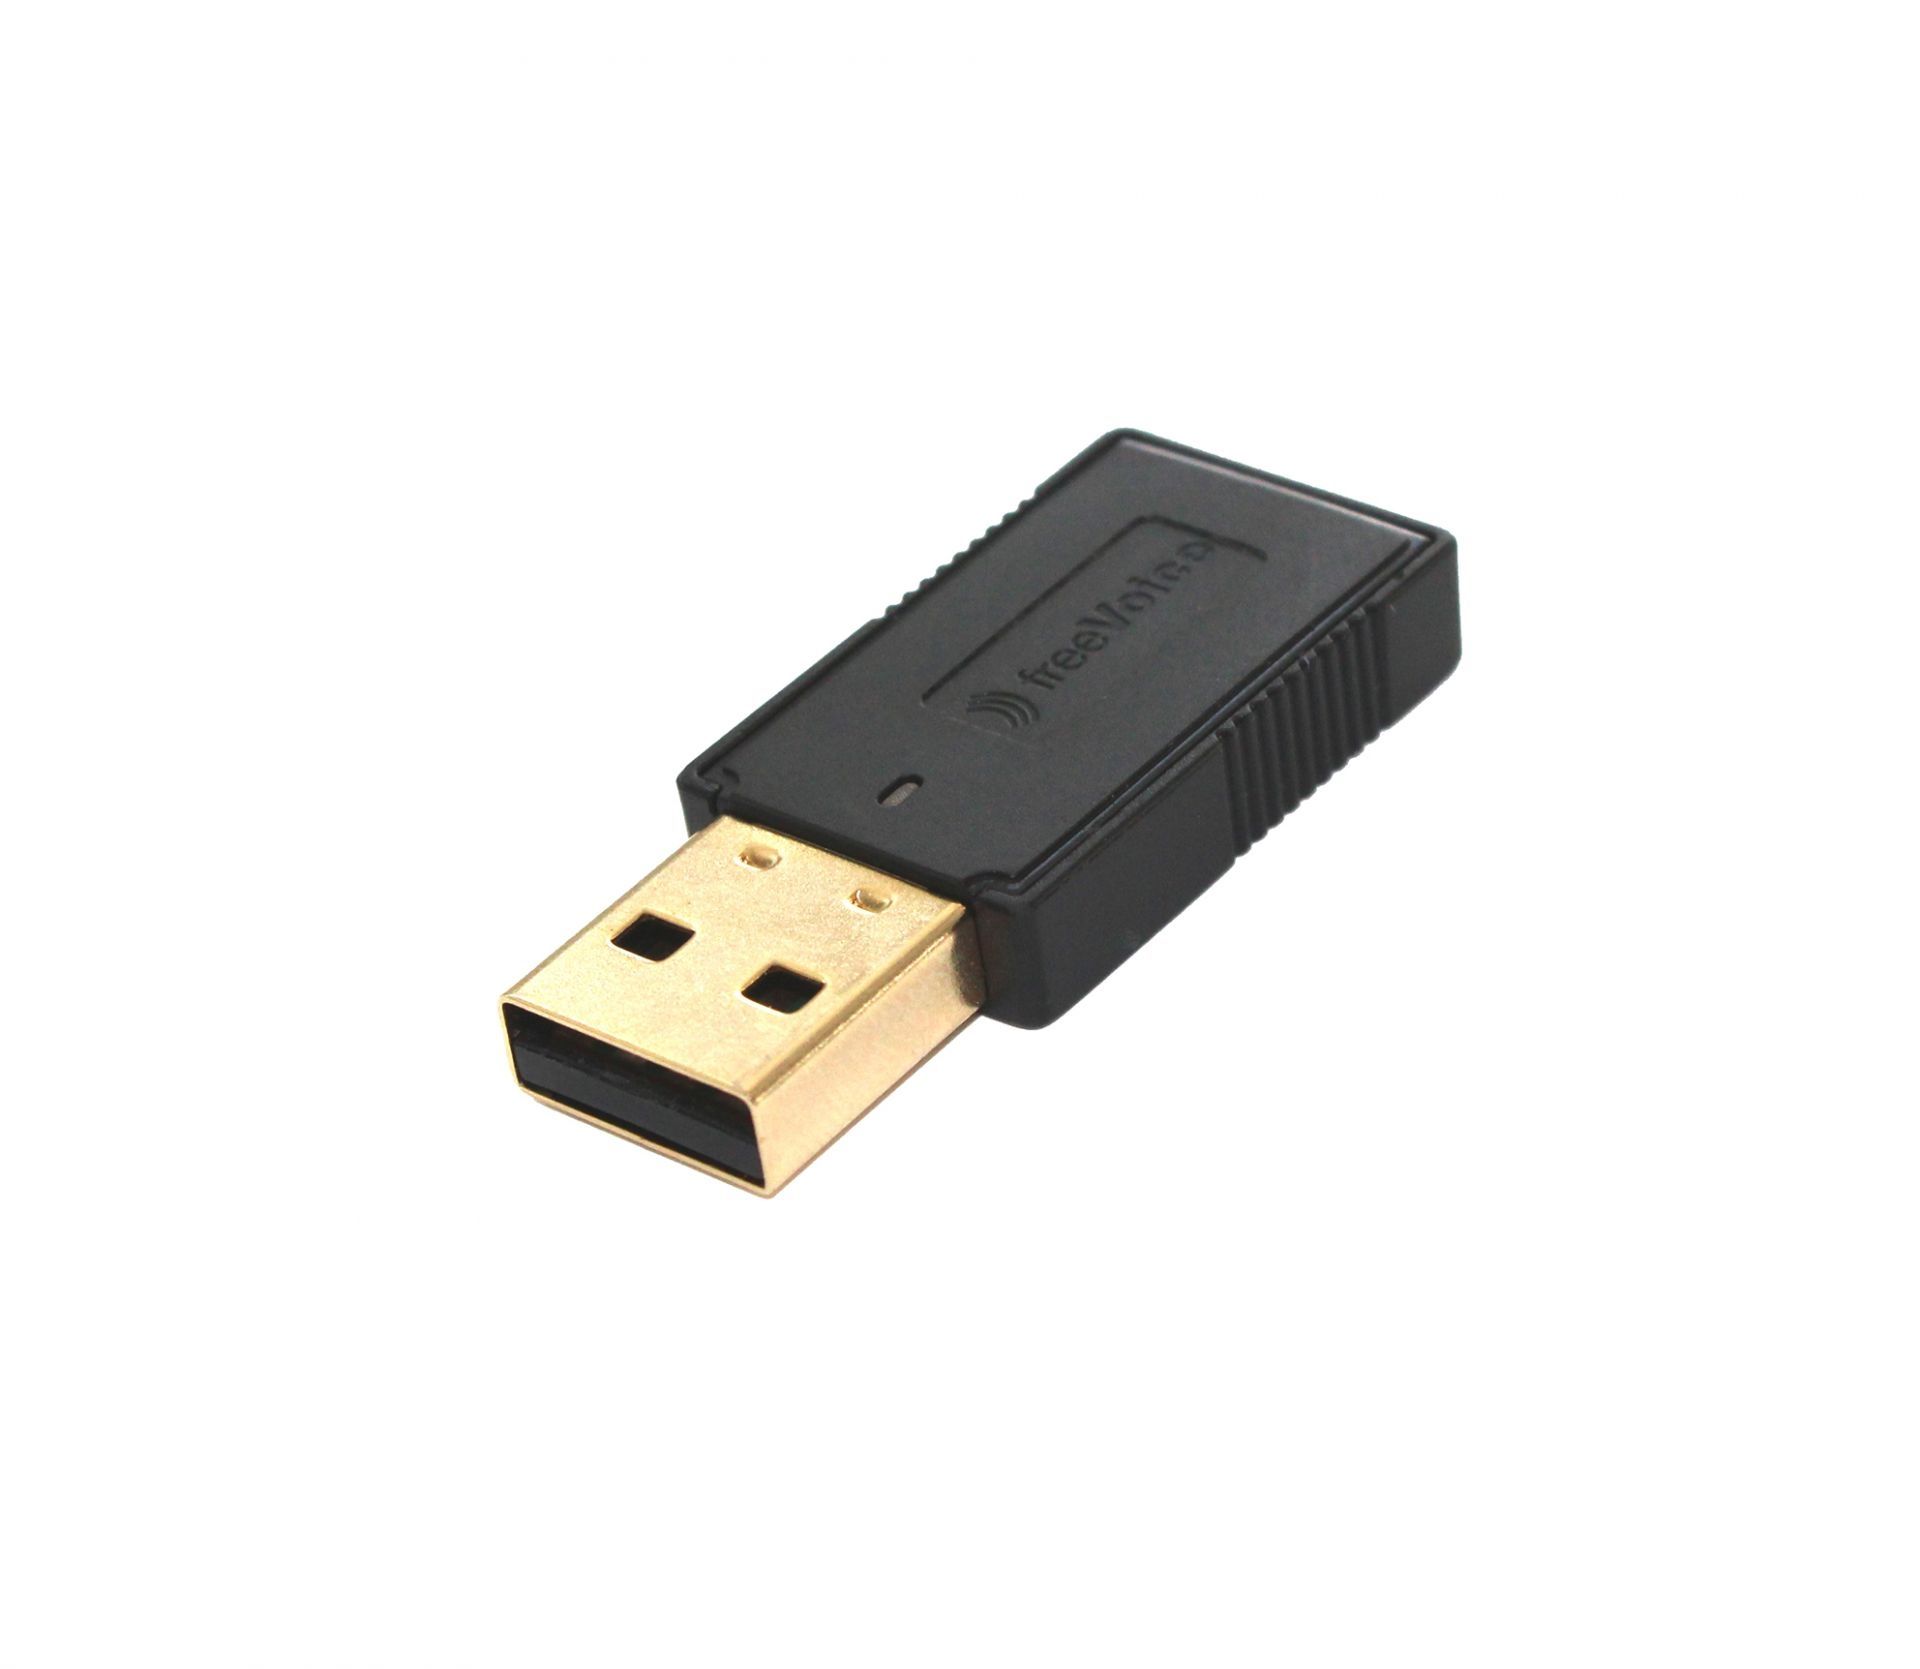 freeVoice Connect Dongle 170 UC